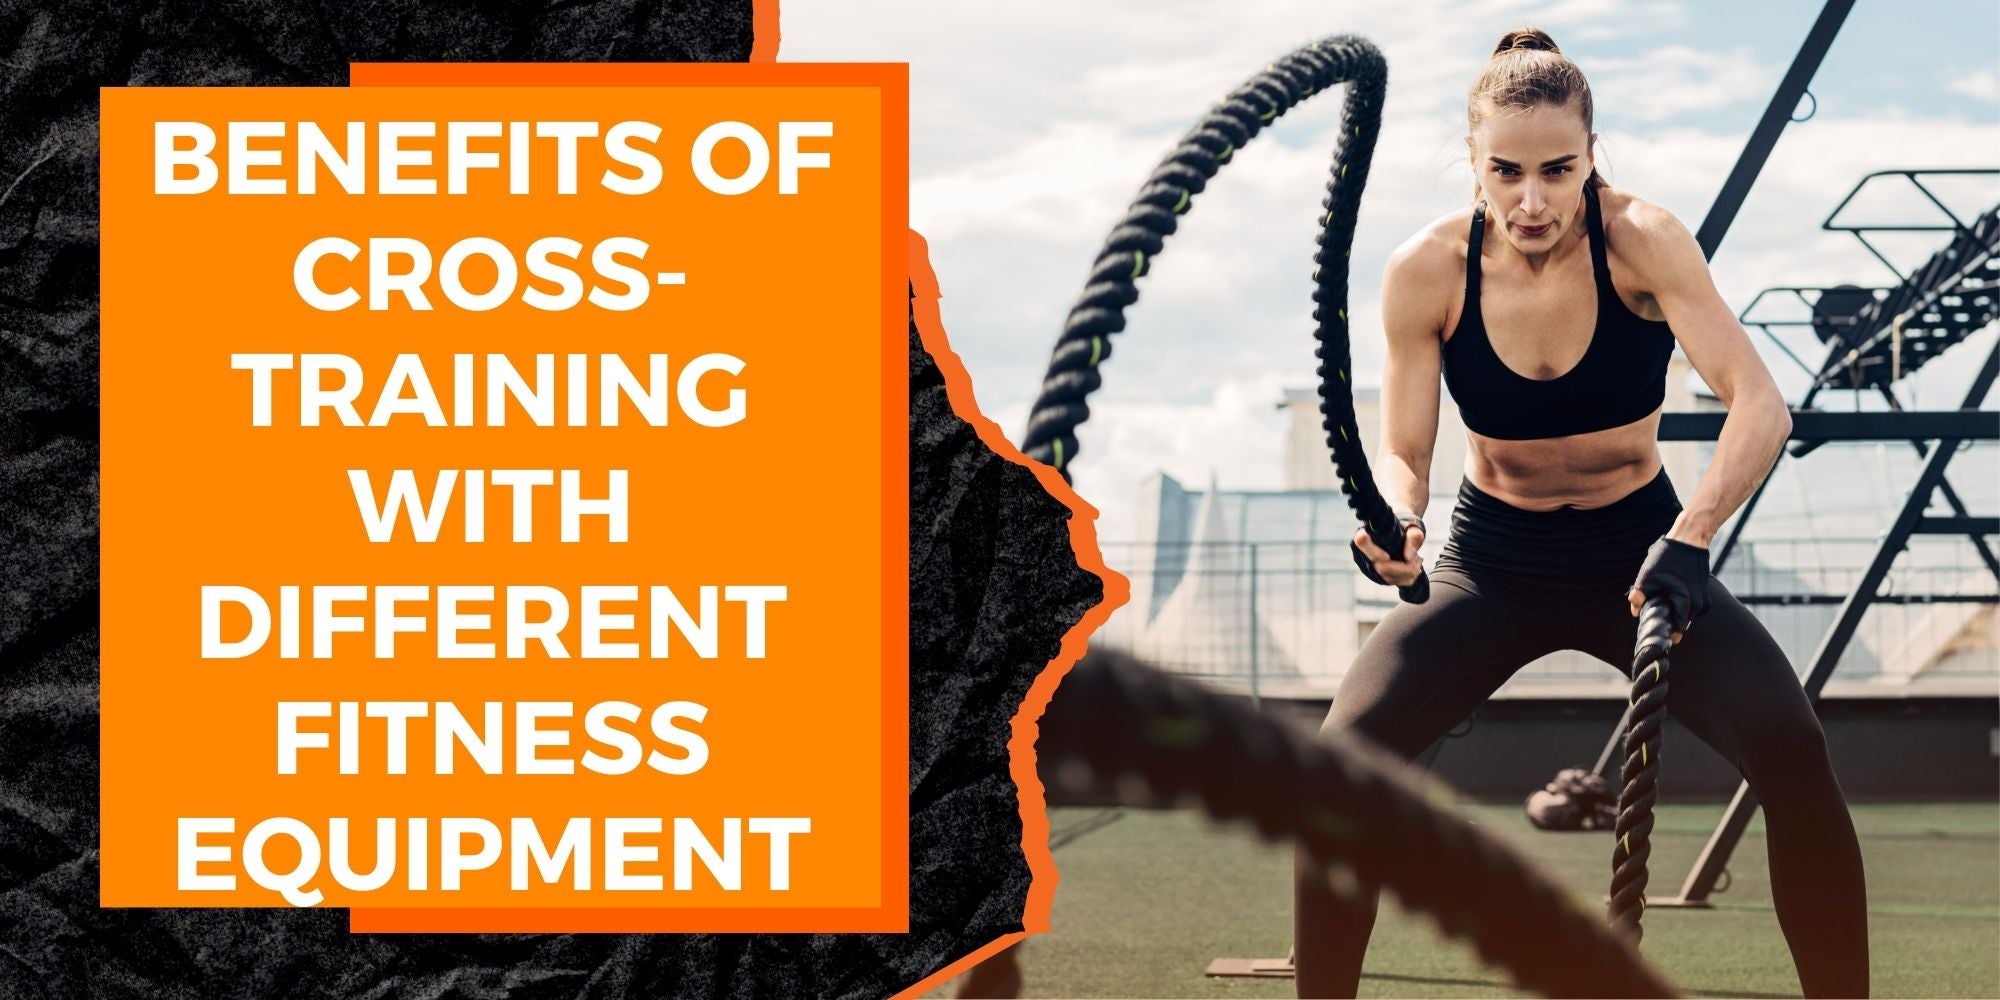 The Benefits of Cross-Training With Different Fitness Equipment